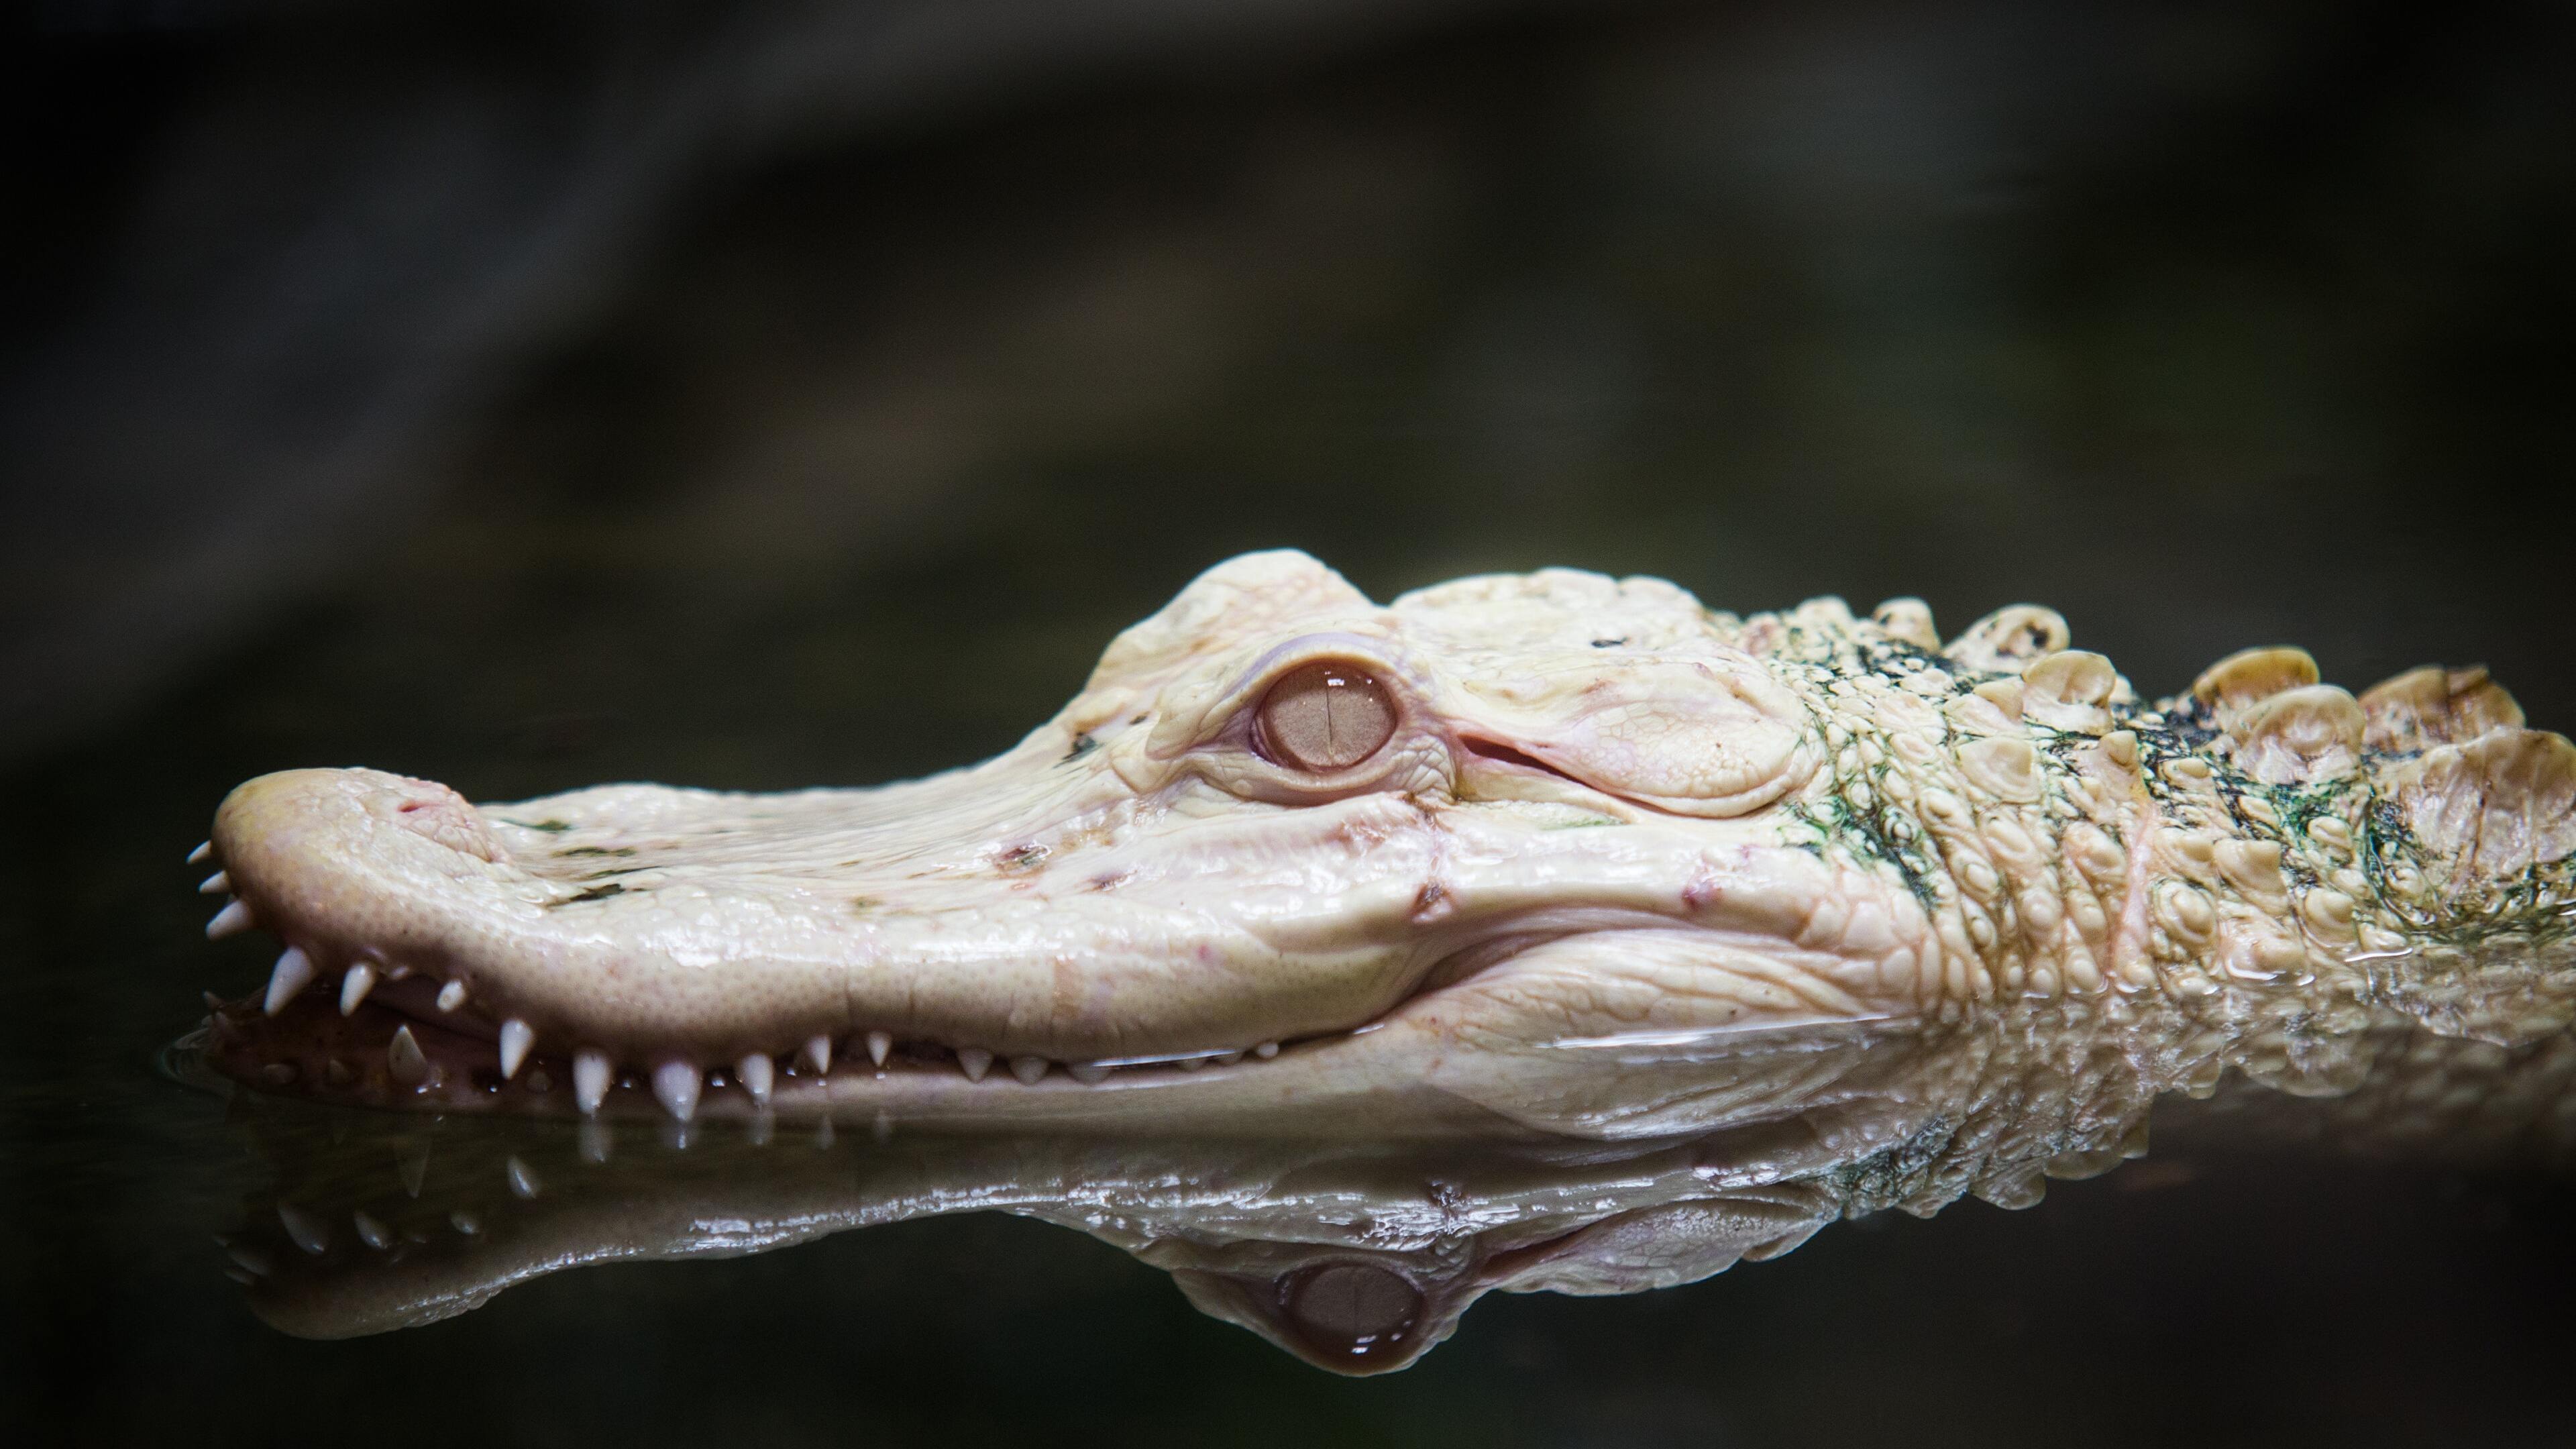 Alligator 4K wallpaper for your desktop or mobile screen free and easy to download